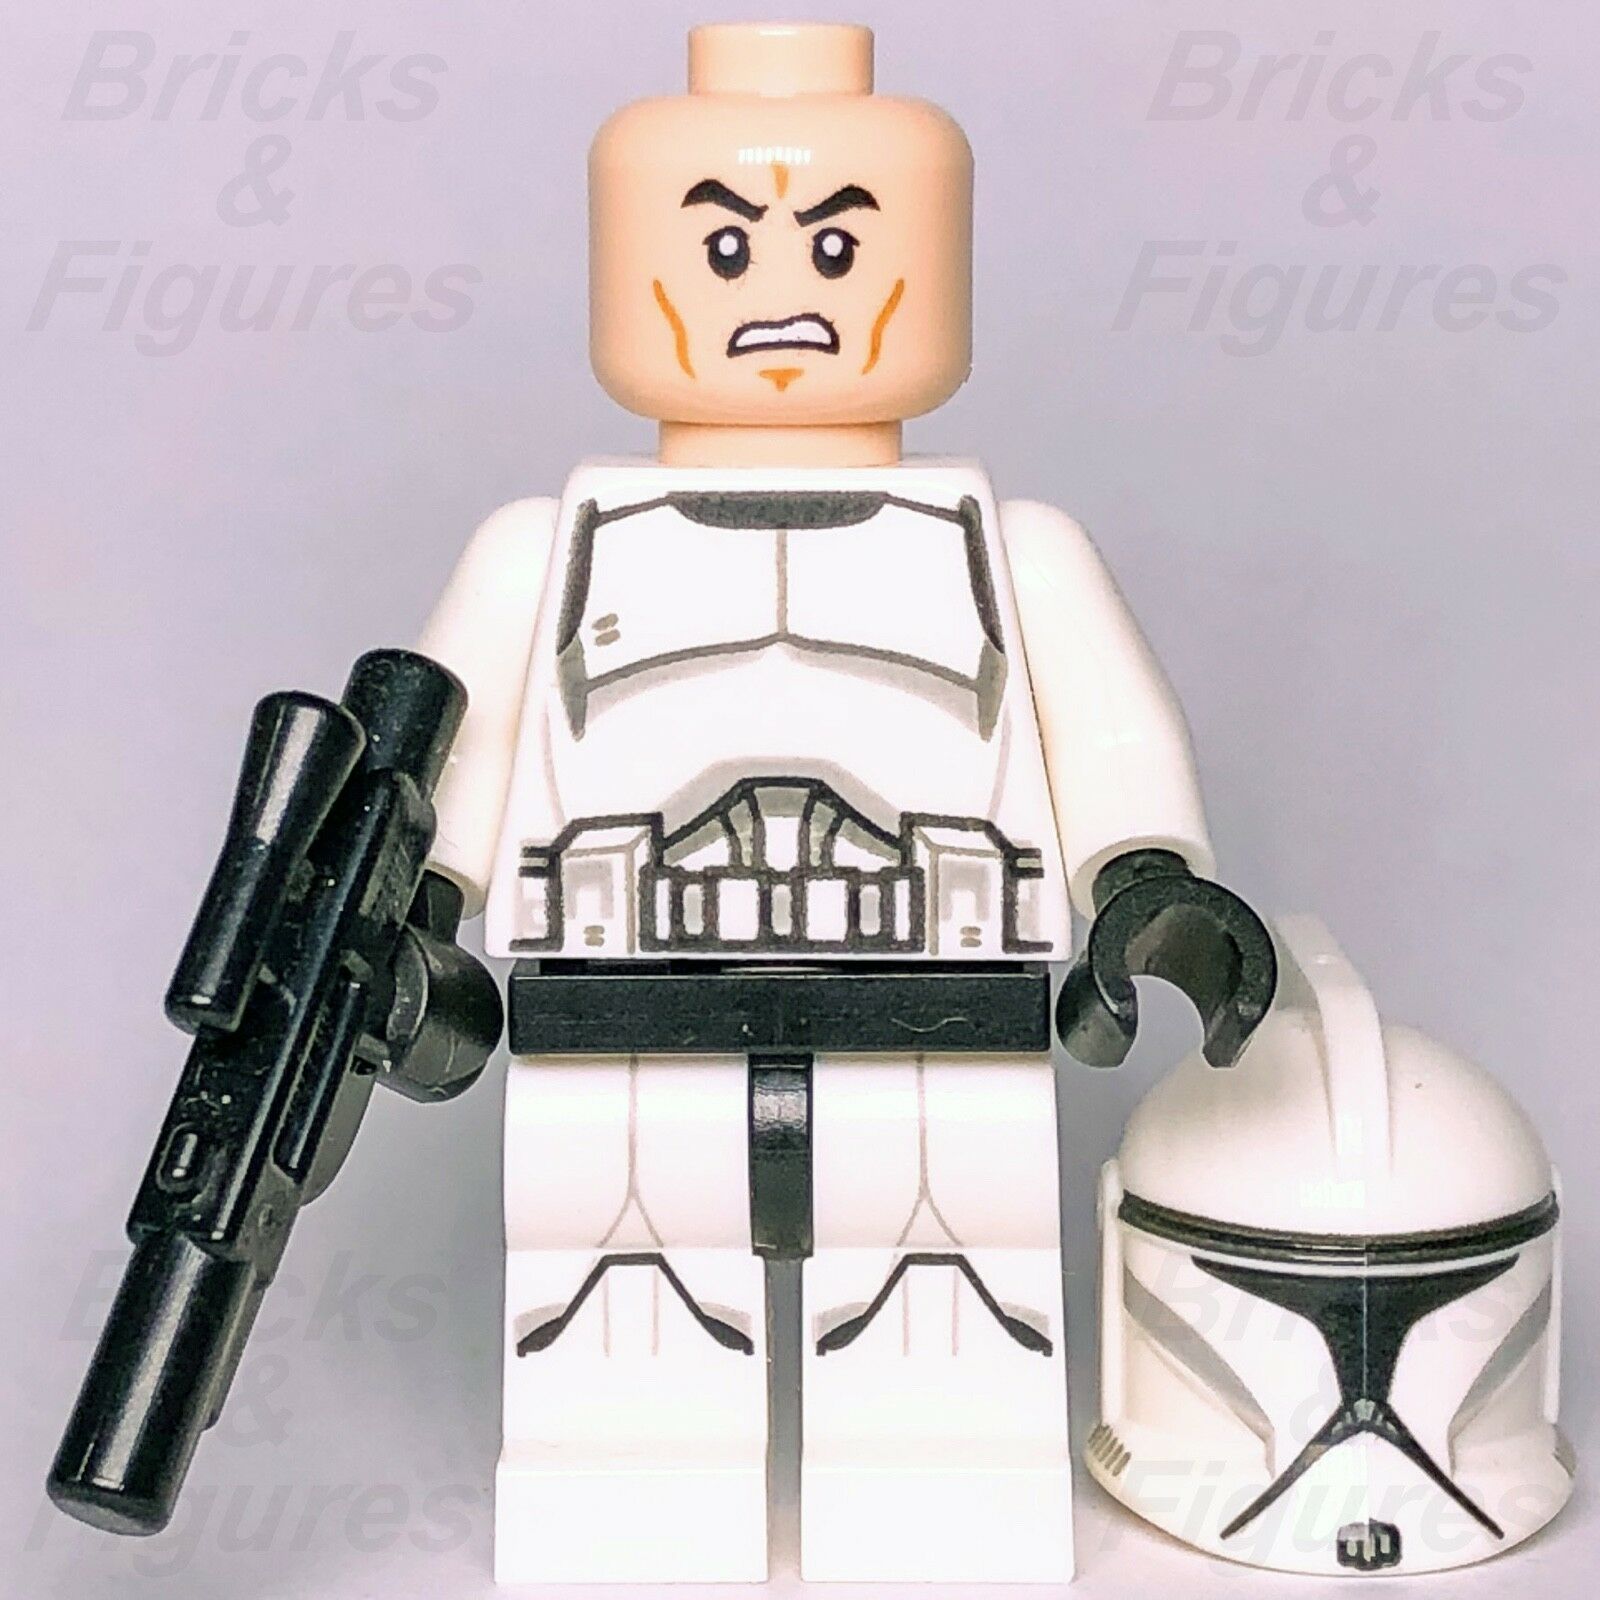 Star Wars LEGO Phase 1 Clone Trooper Attack of the Clones Minifig 75206 Genuine - Bricks & Figures